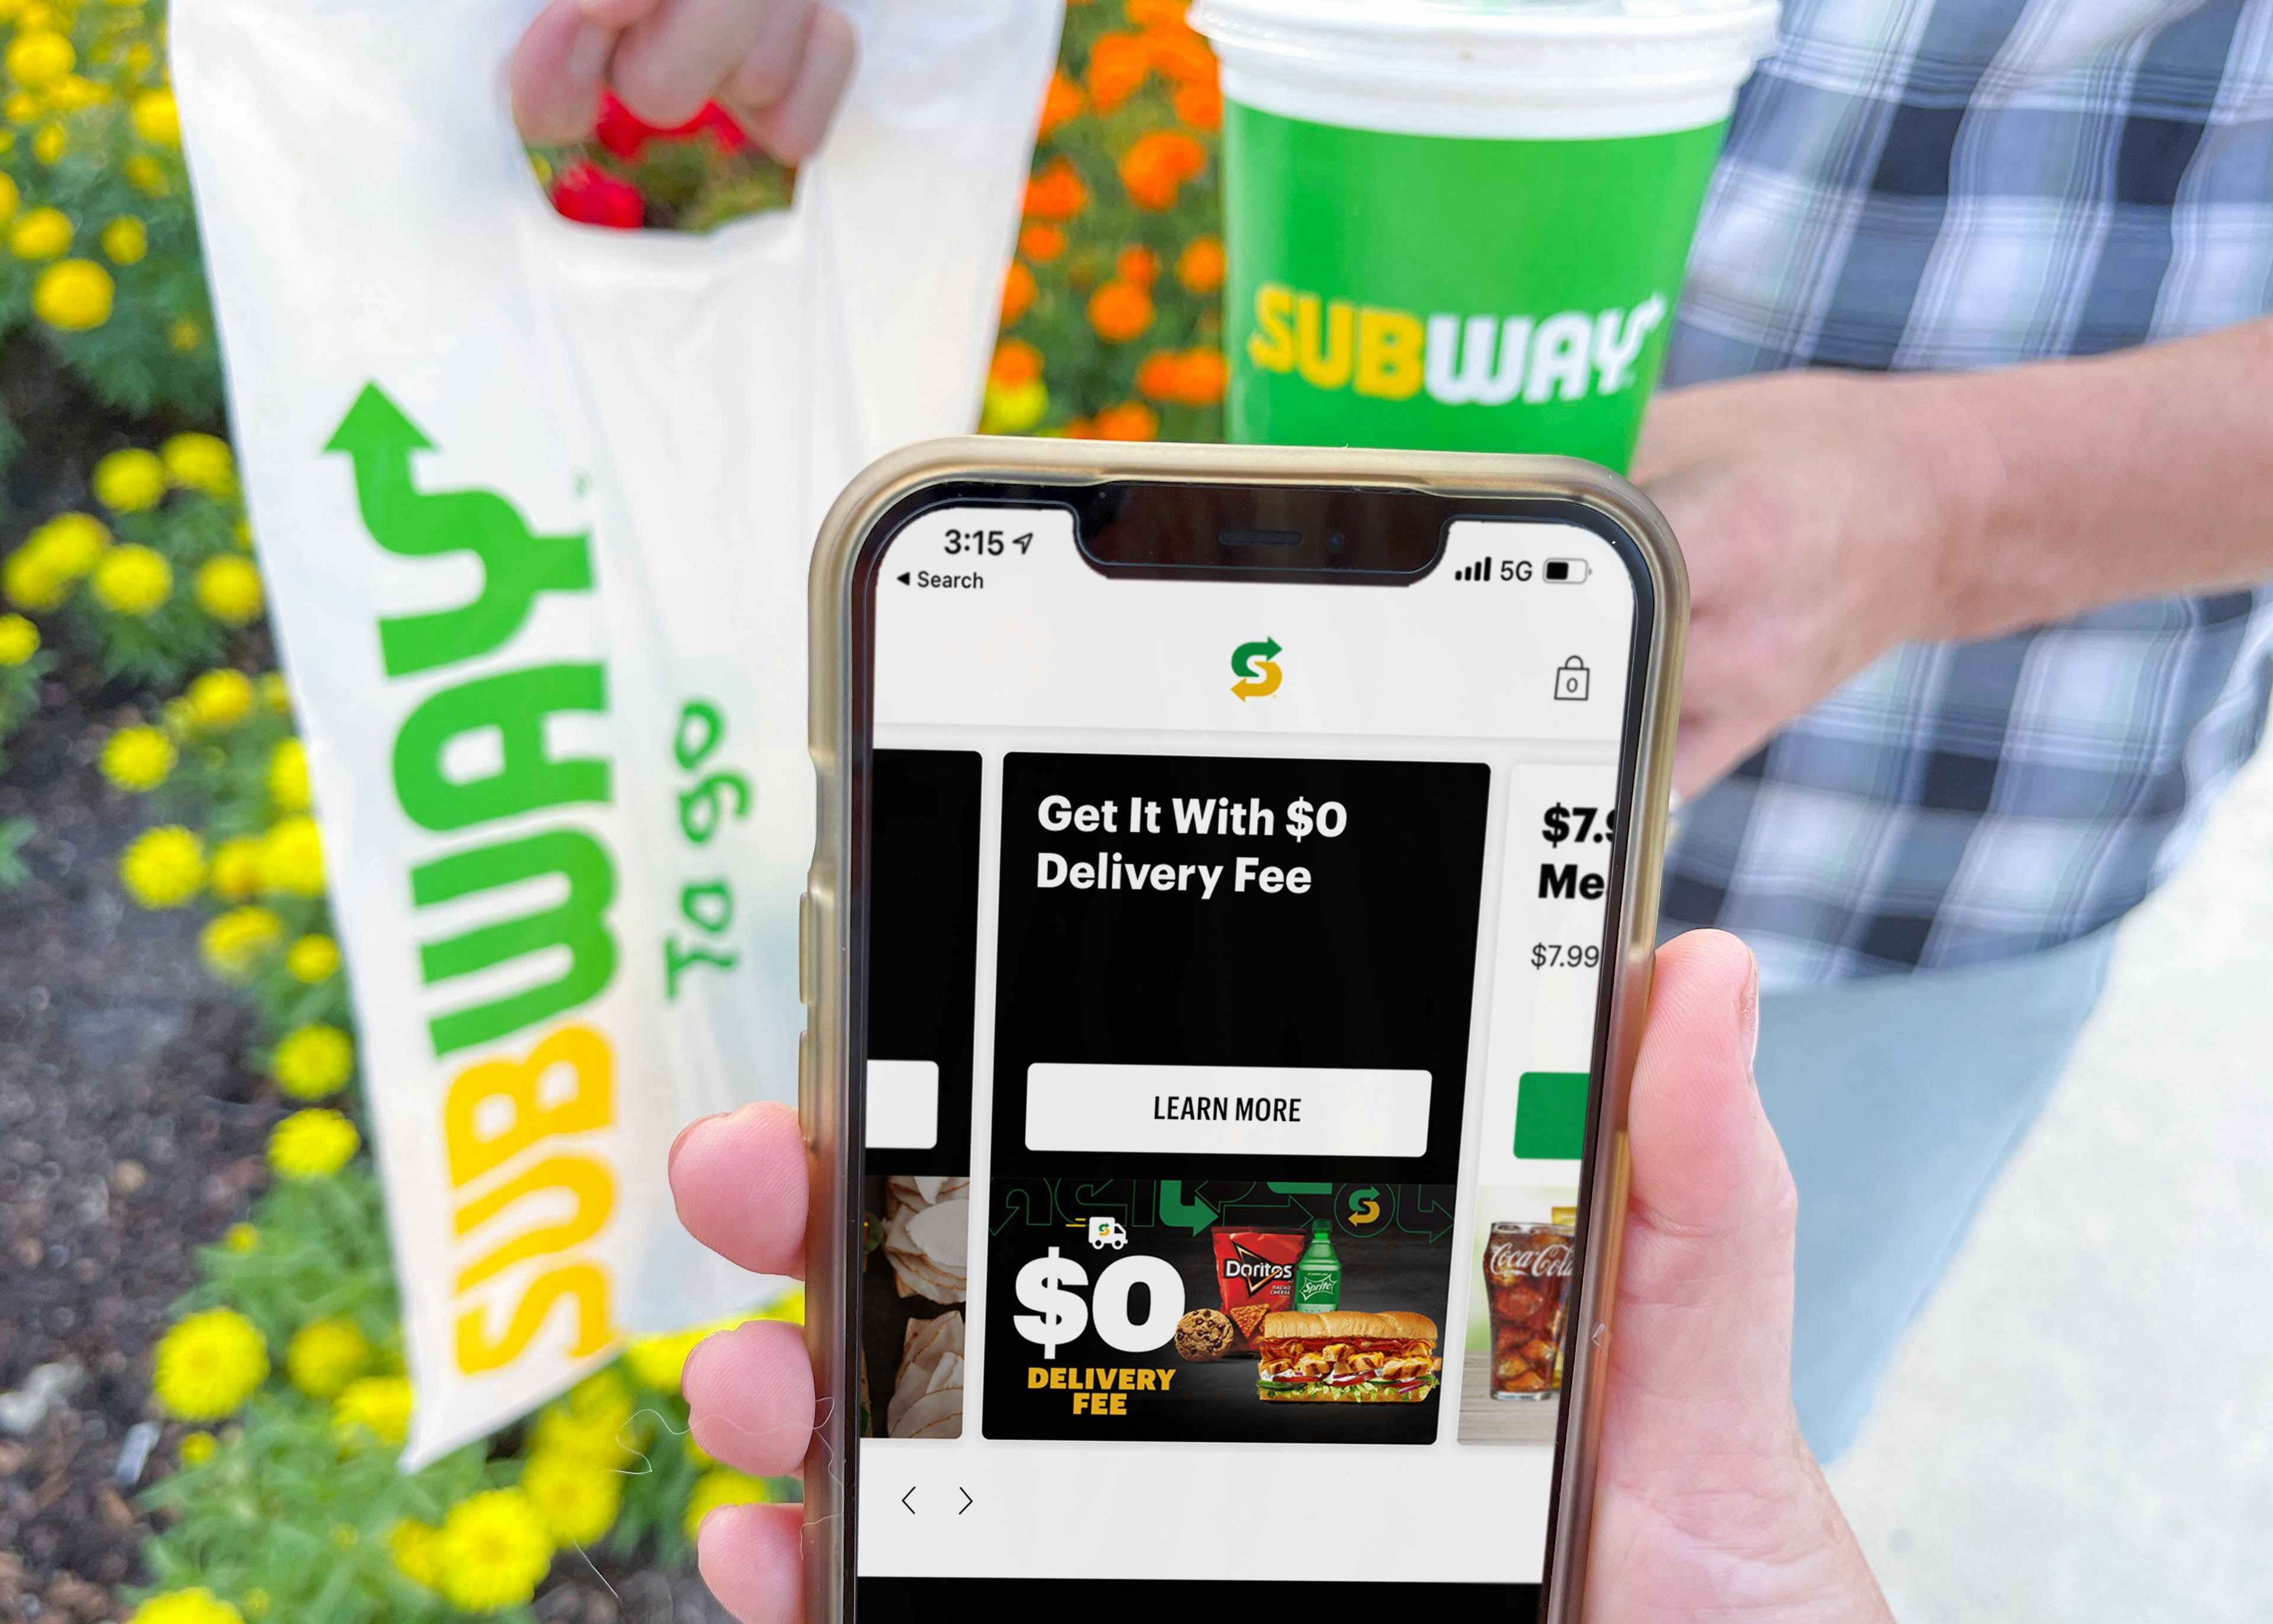 subway app with deals on cellphone next to subway bag